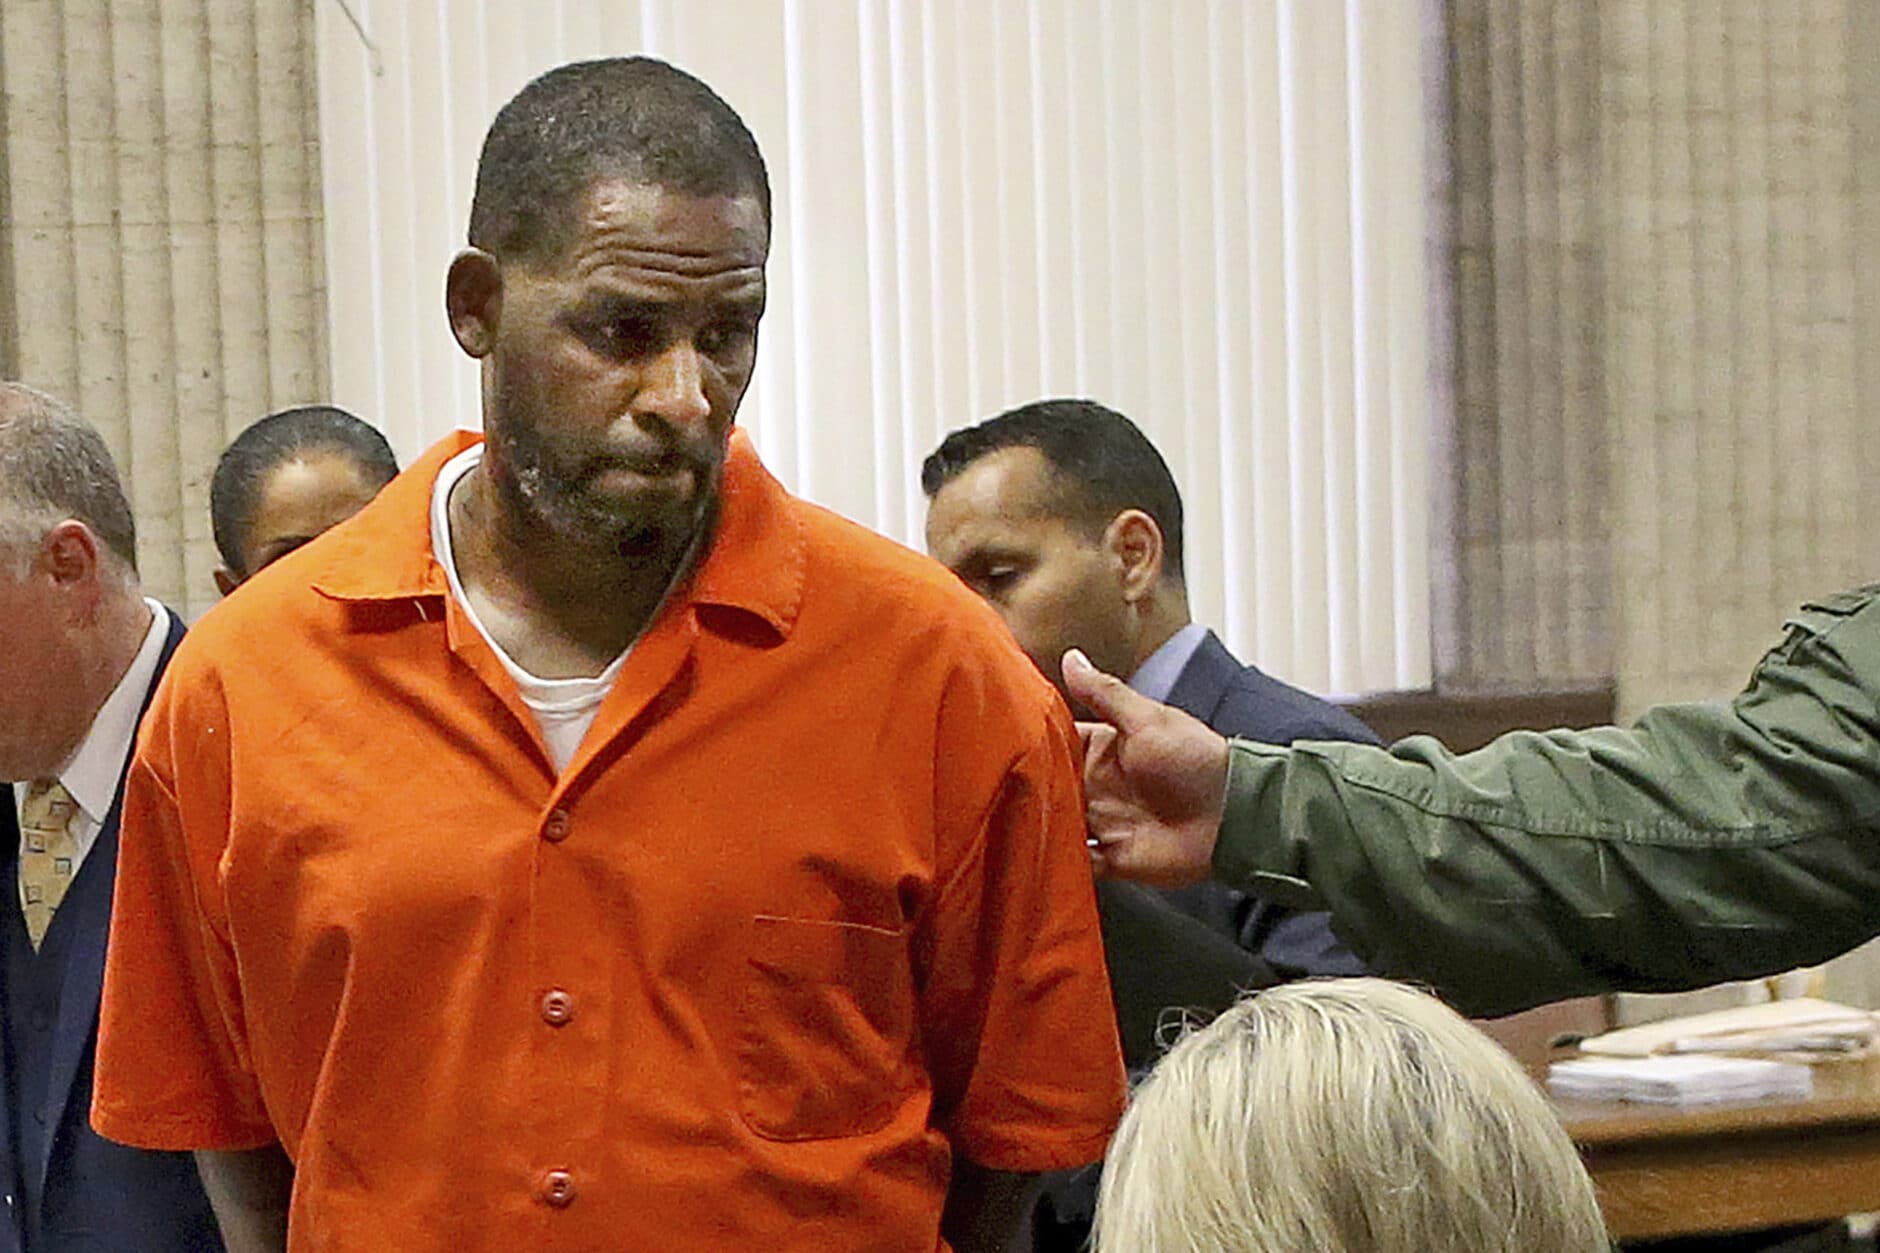 More alleged R. Kelly victims come forward as trial enters third week